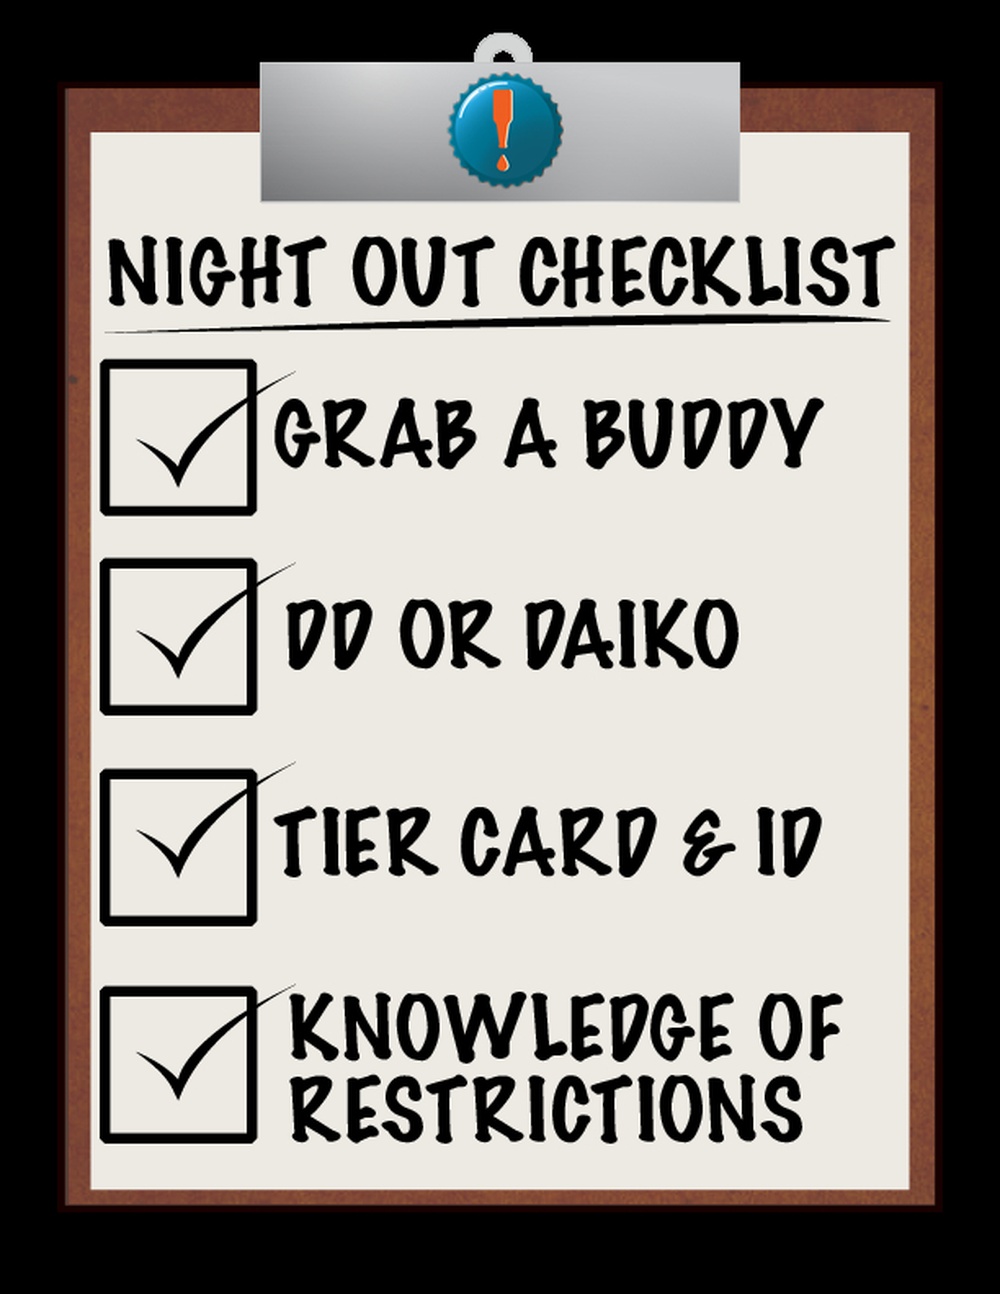 N1D - Night Out Checklist